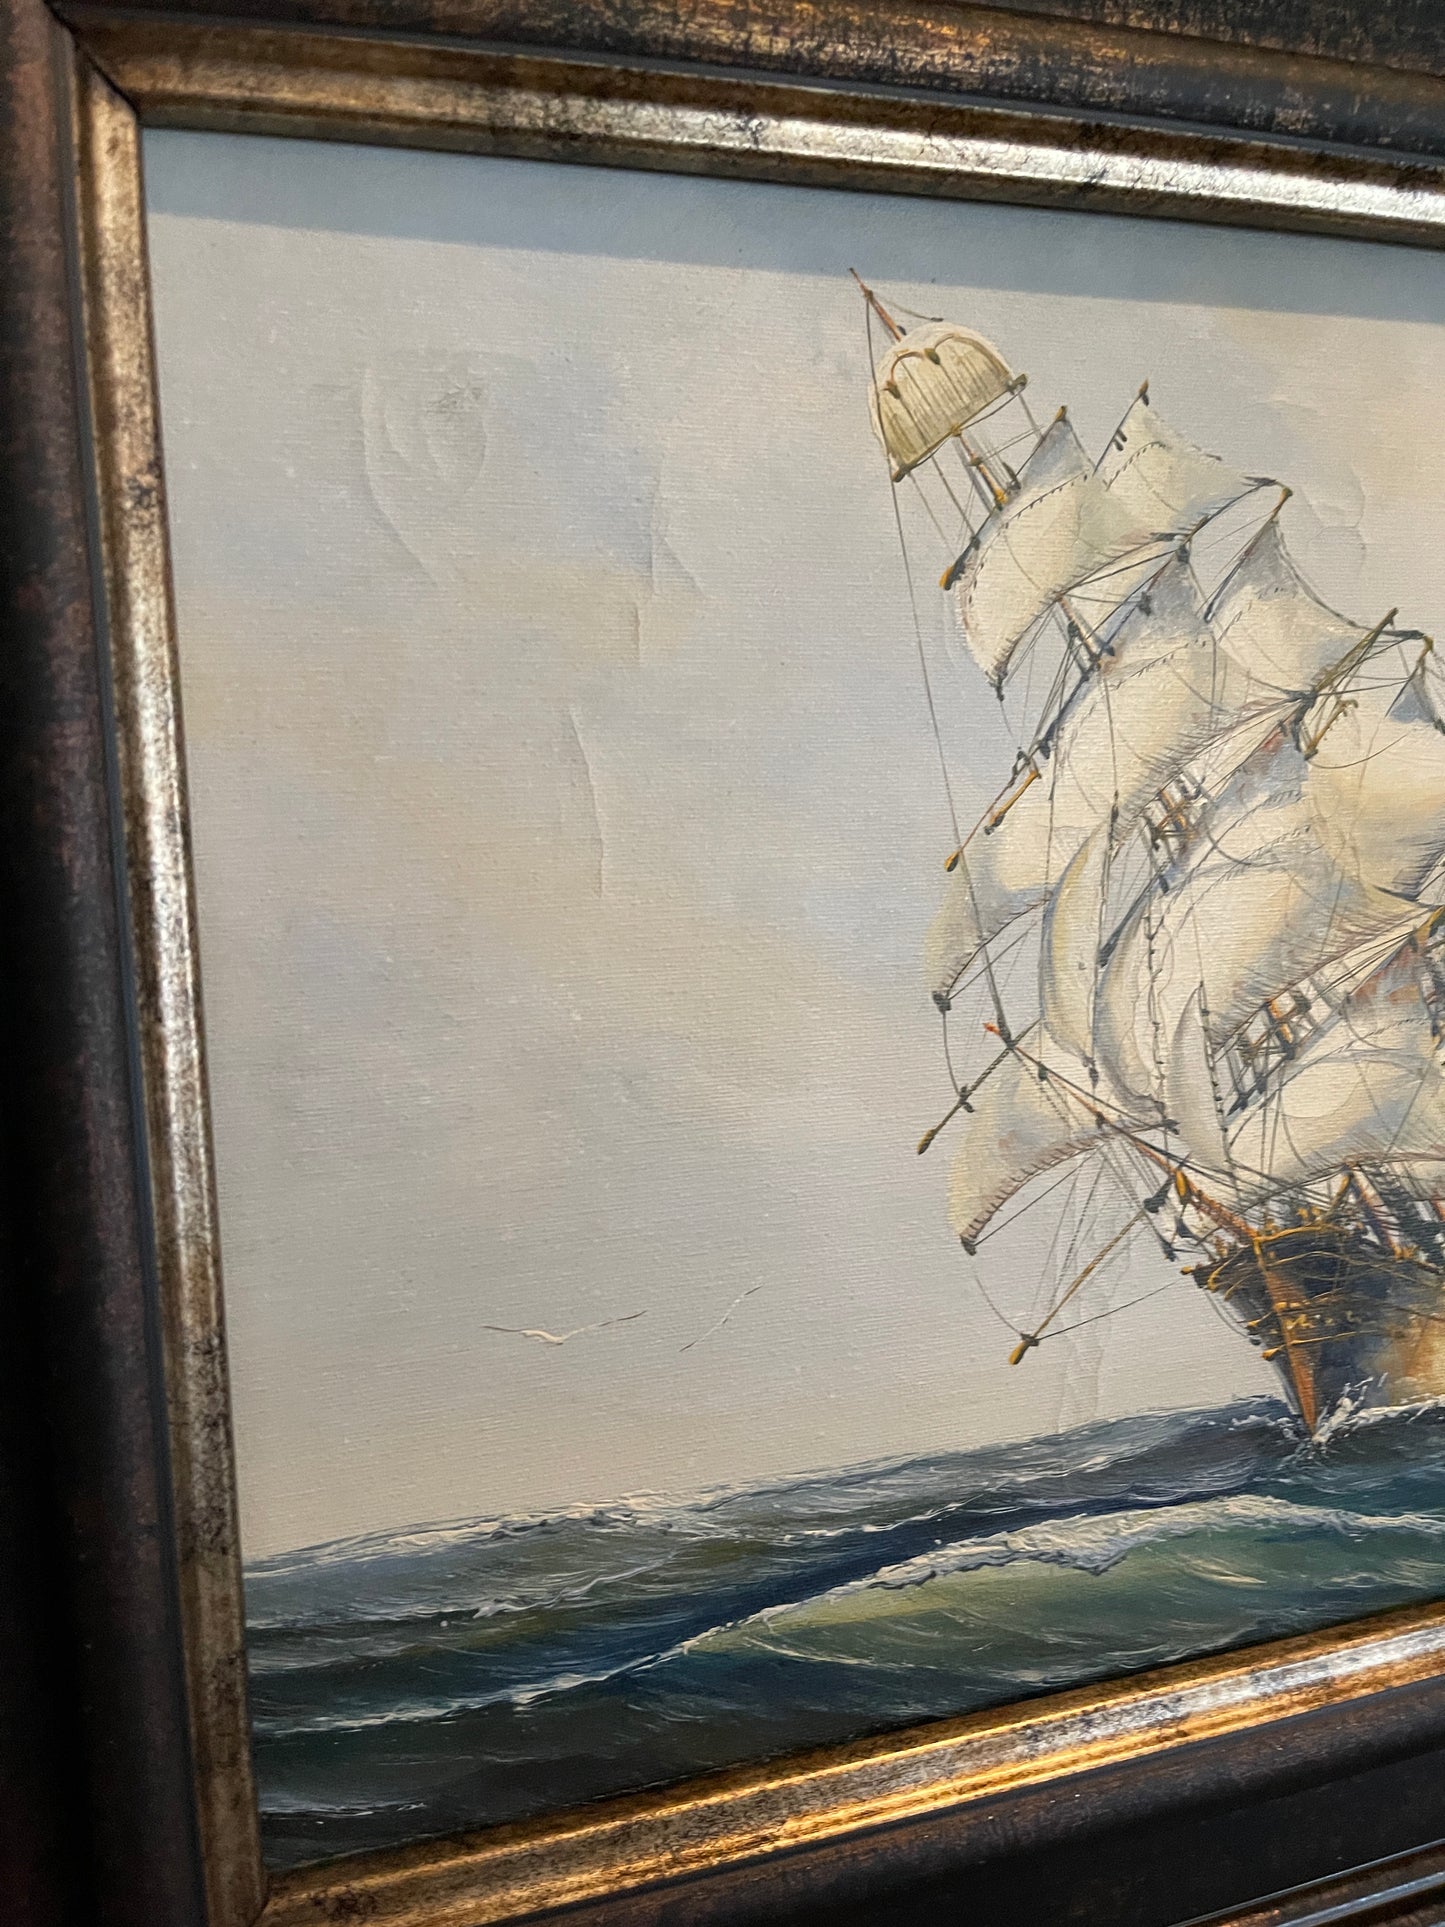 Vintage Clipper Ship Oil Painting by British Artist, John Ambrose (1931-2010)